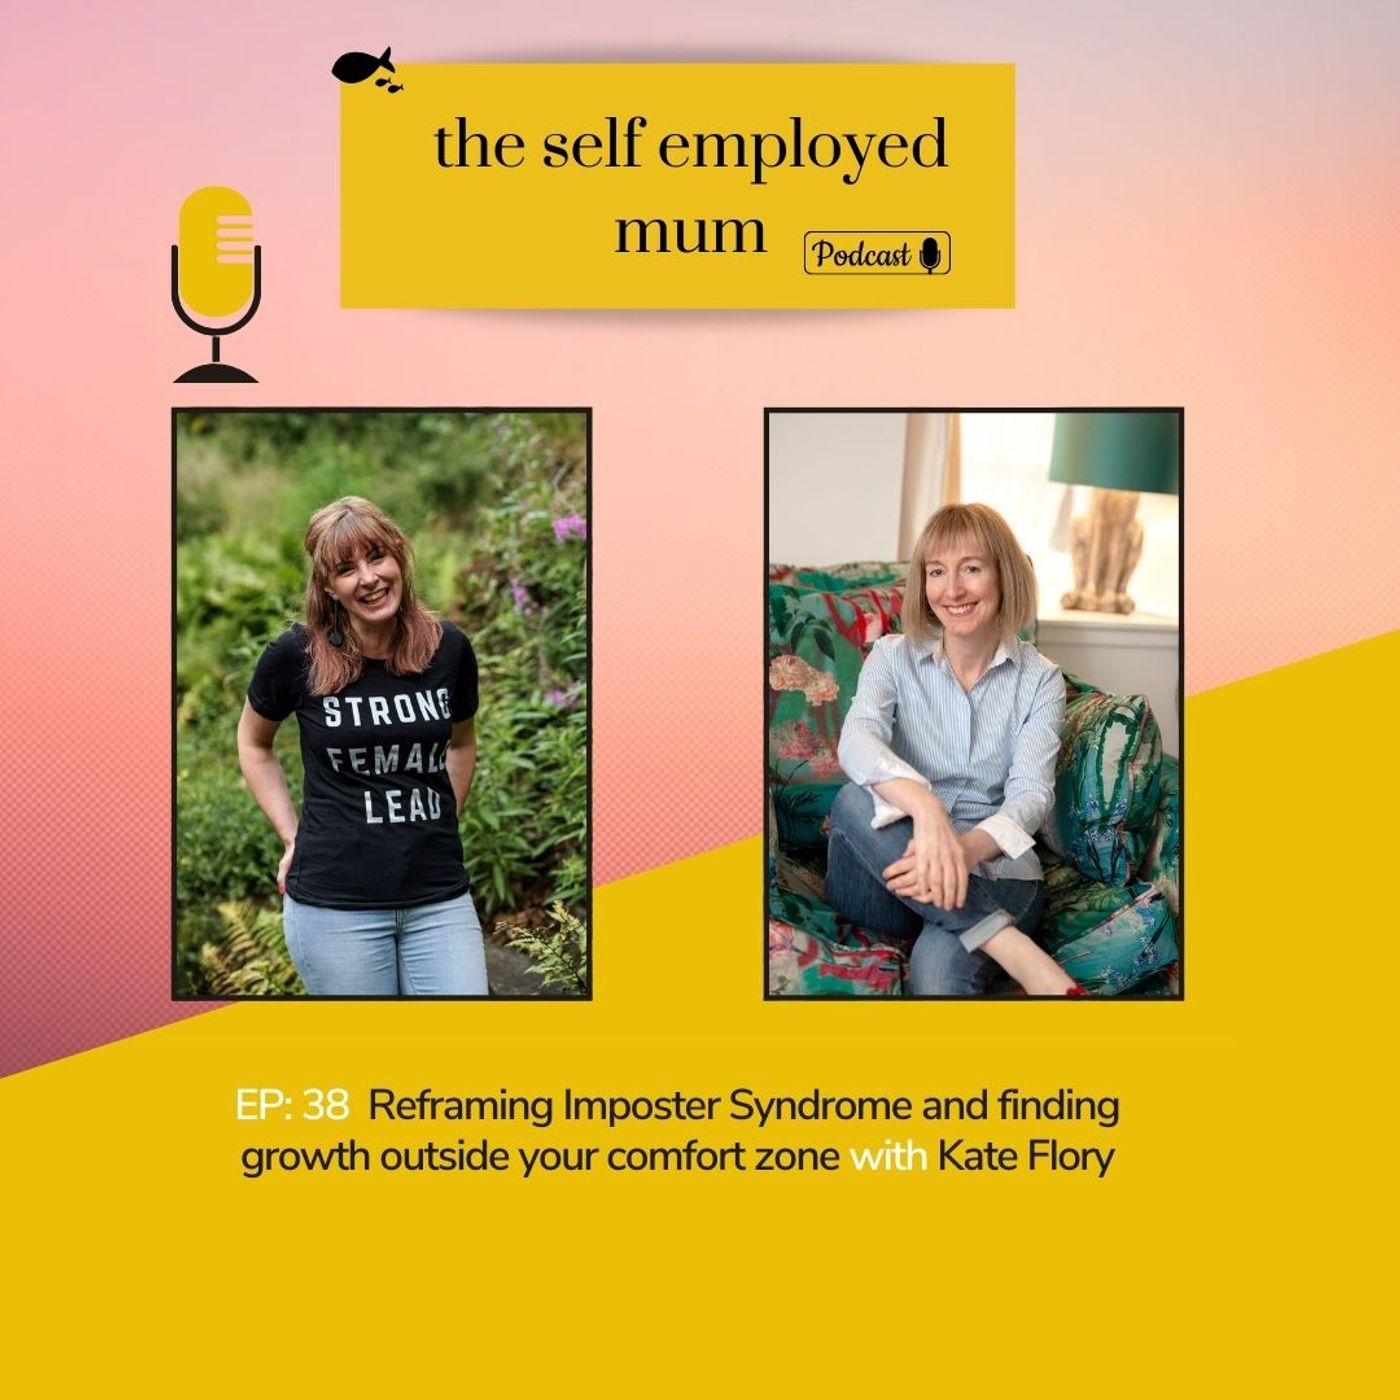 EP: 38  Reframing Imposter Syndrome and finding growth outside your comfort zone with Kate Flory